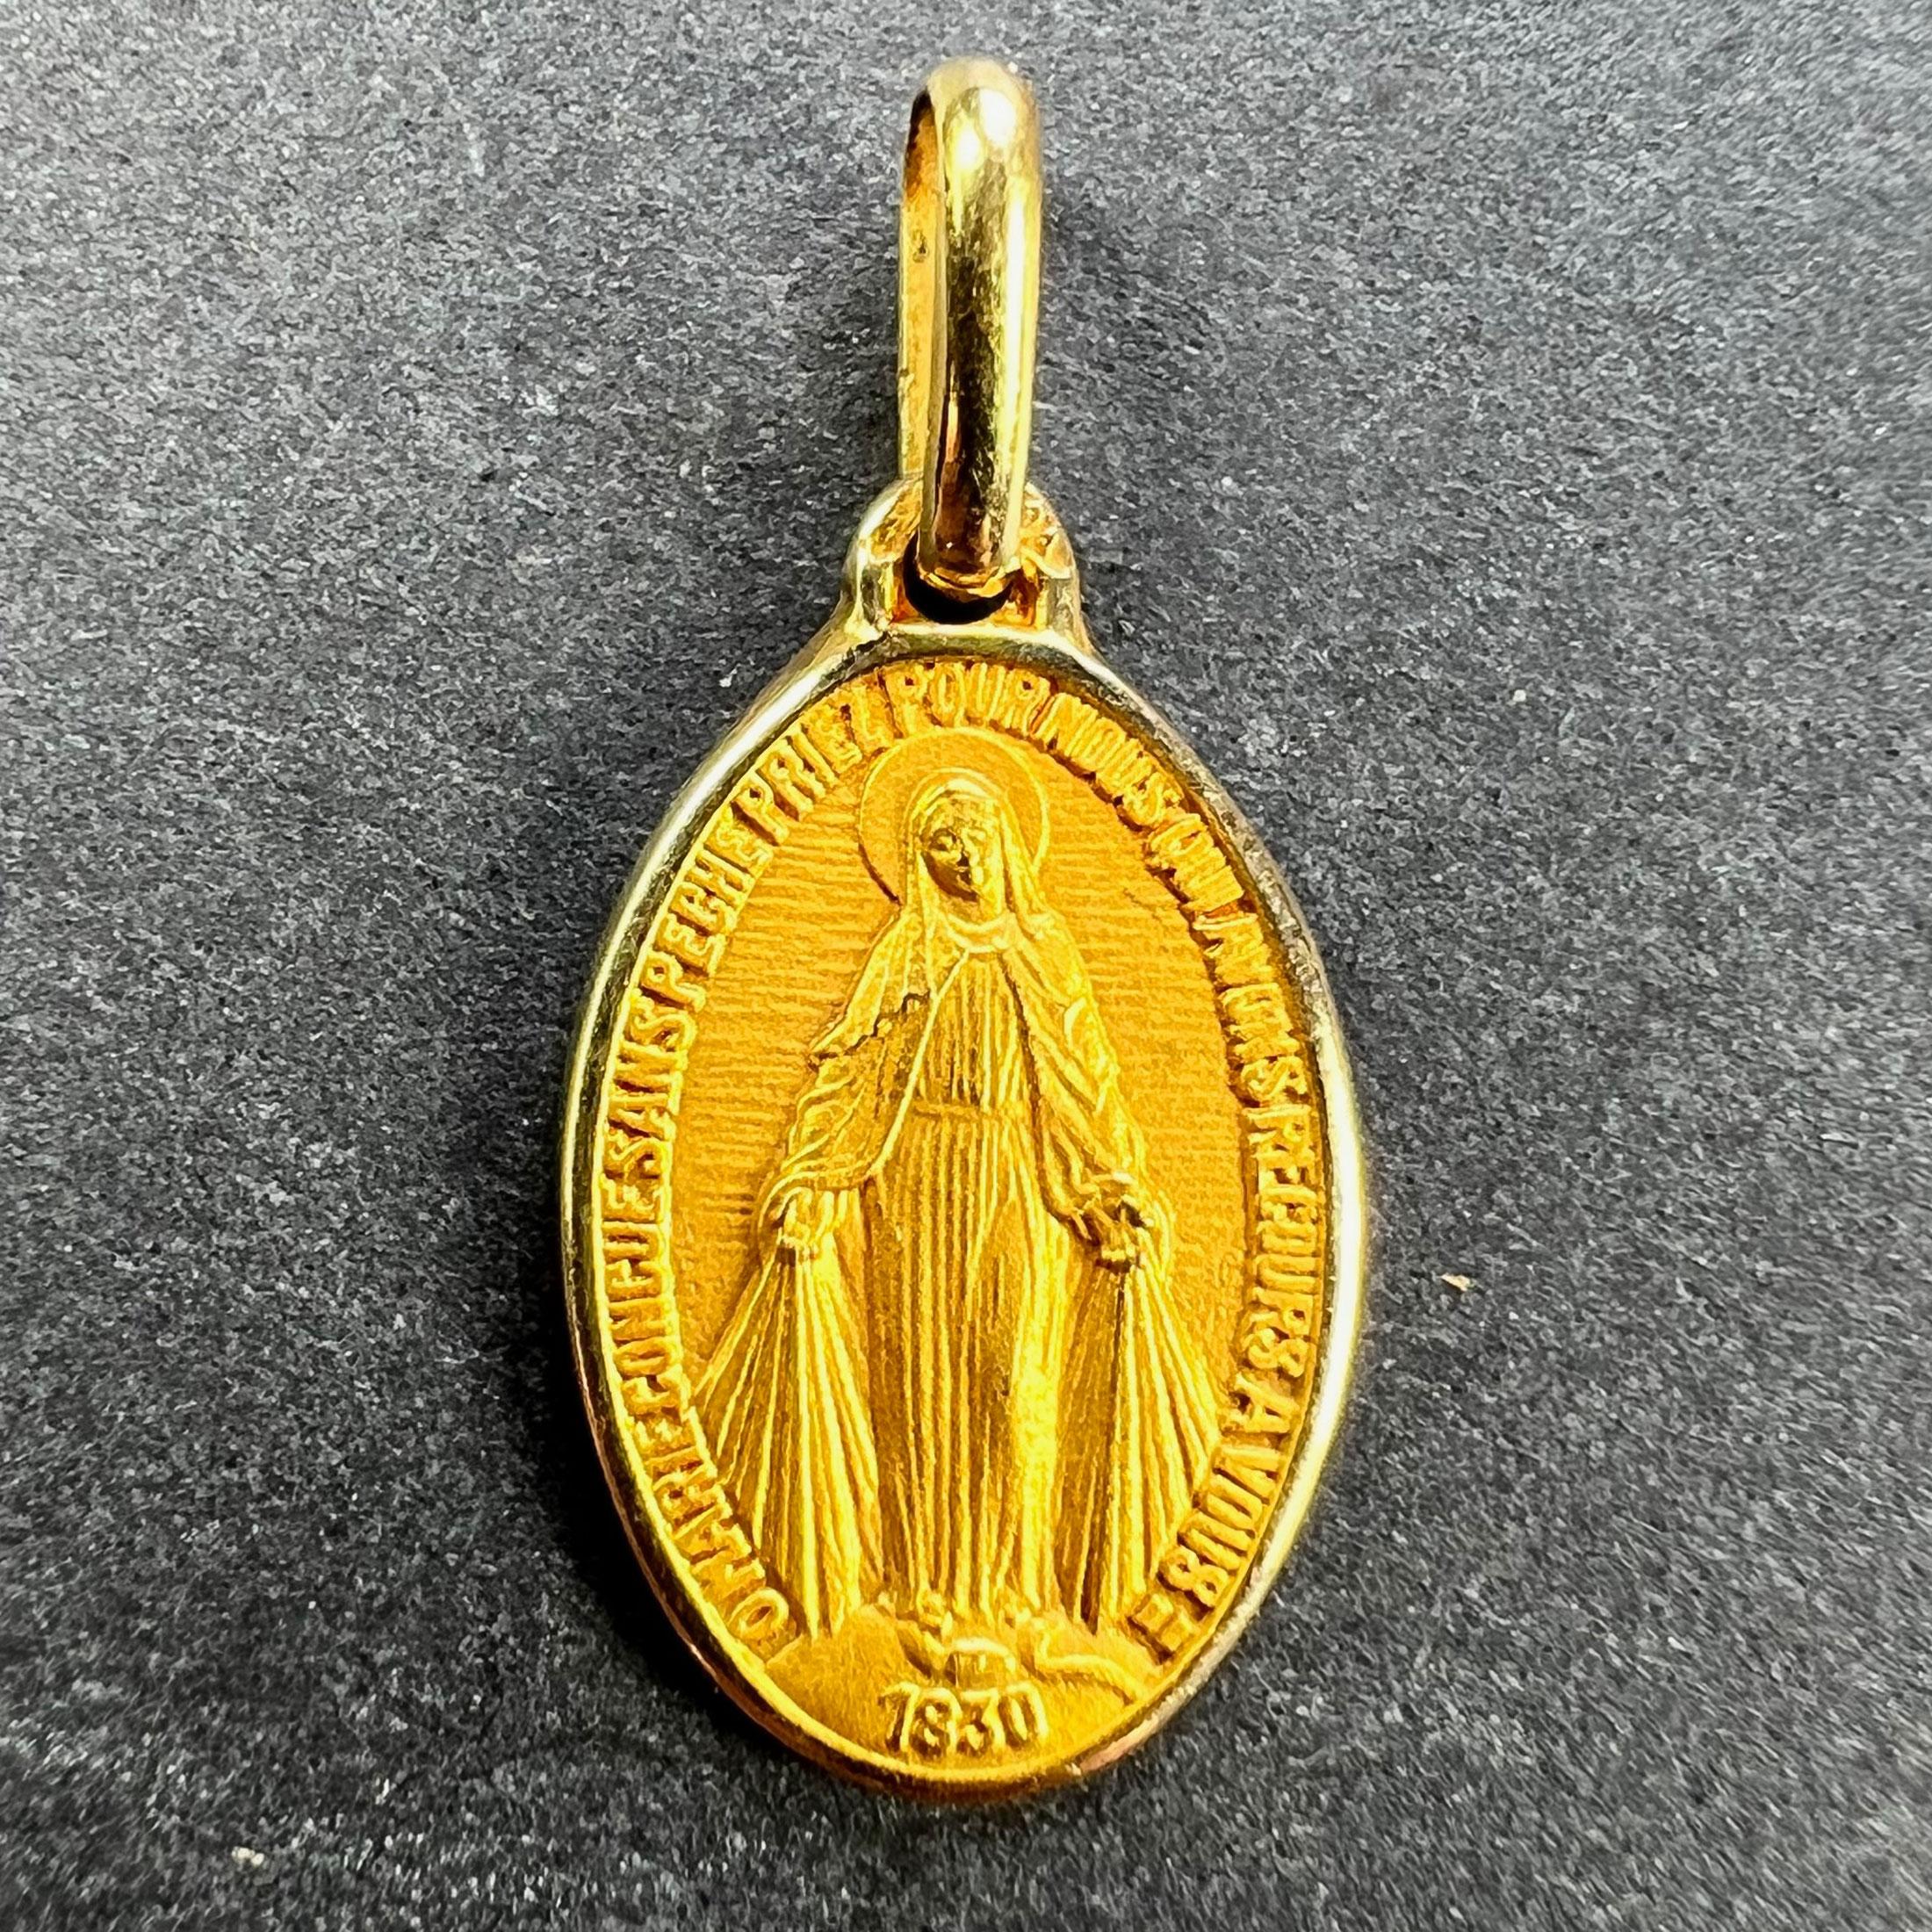 A French 18 karat (18K) yellow gold charm pendant designed as the Miraculous Medal by Augis. The medal depicts the Virgin Mary standing on a globe above the date 1830, crushing a serpent beneath her feet with rays shooting from her hands to